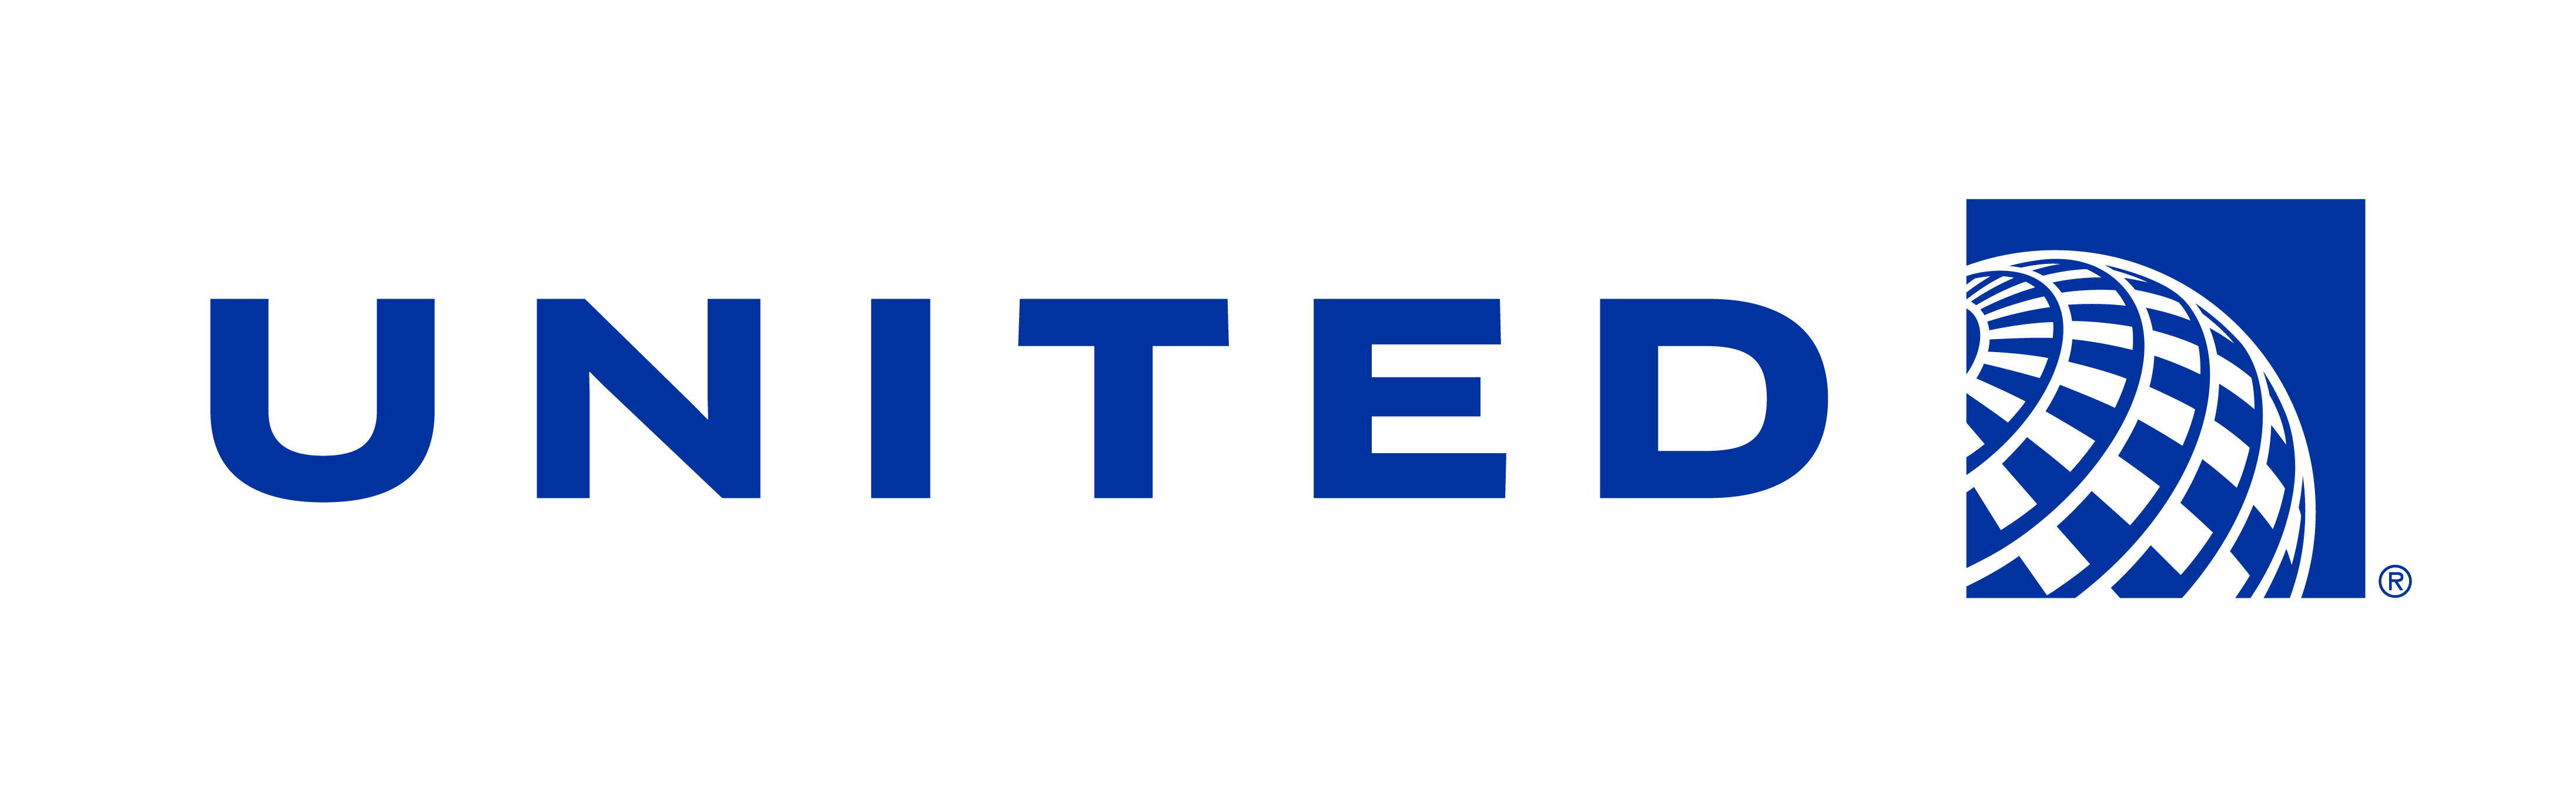 United Airlines with a white and purple checkerboard pattern